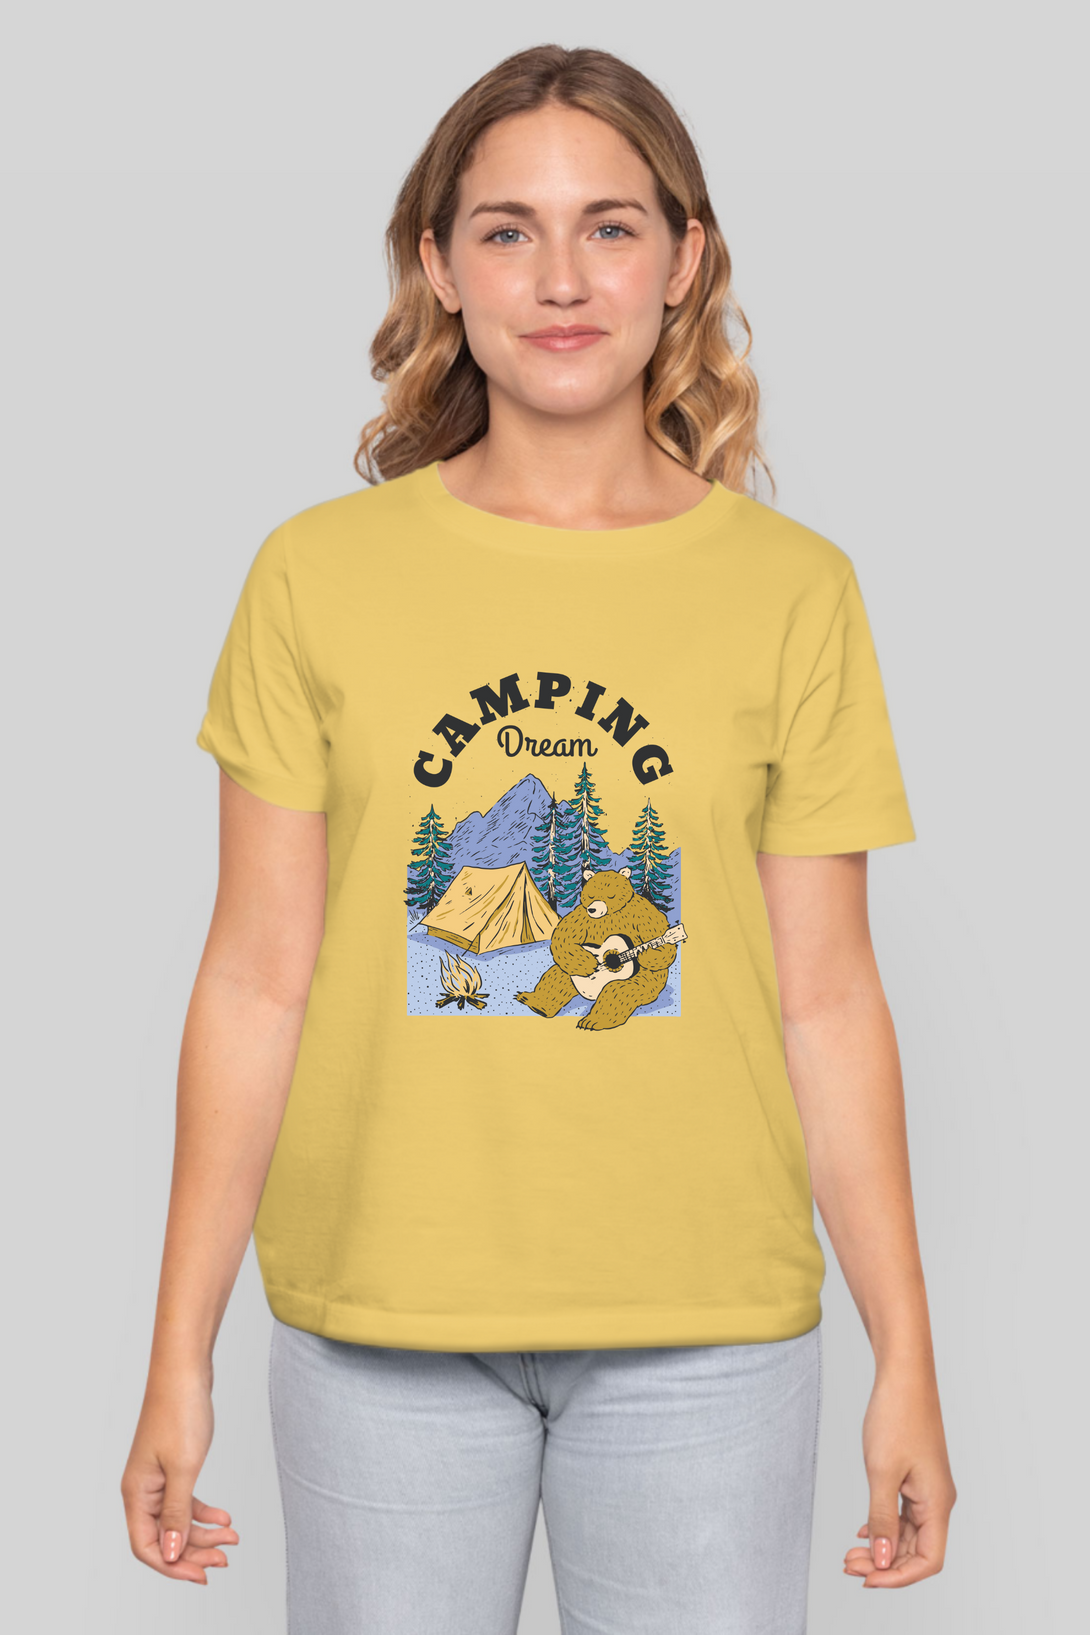 Camping Dream Printed T-Shirt For Women - WowWaves - 8